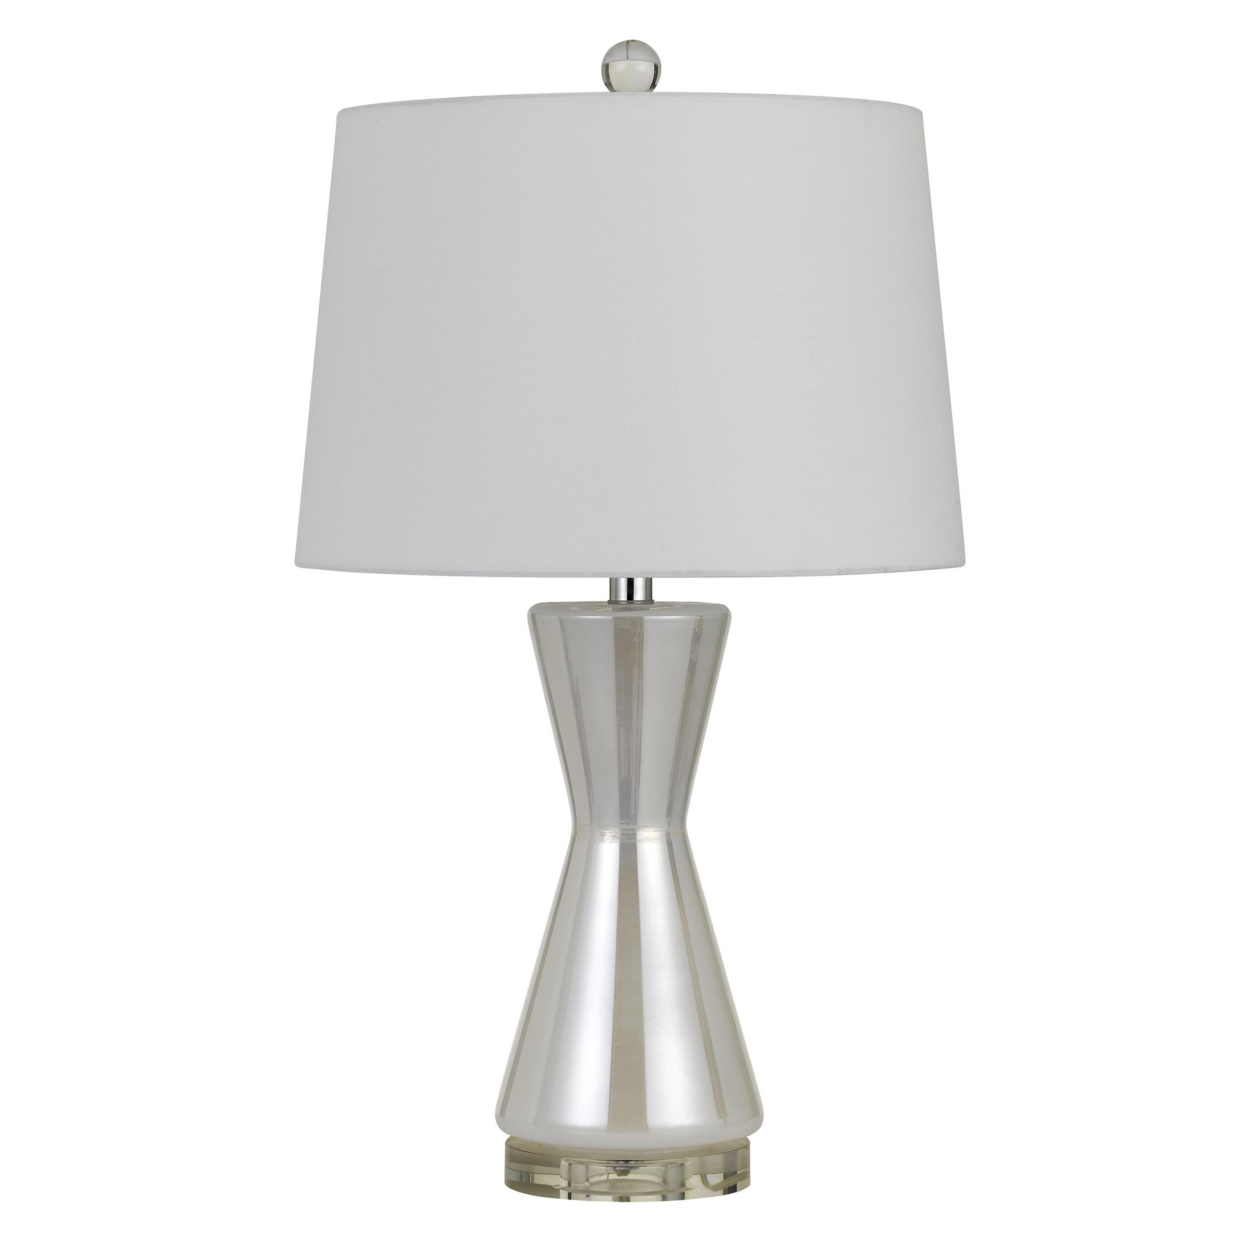 26 Glass Table Lamp With Hardback Shade, Silver And White- Saltoro Sherpi